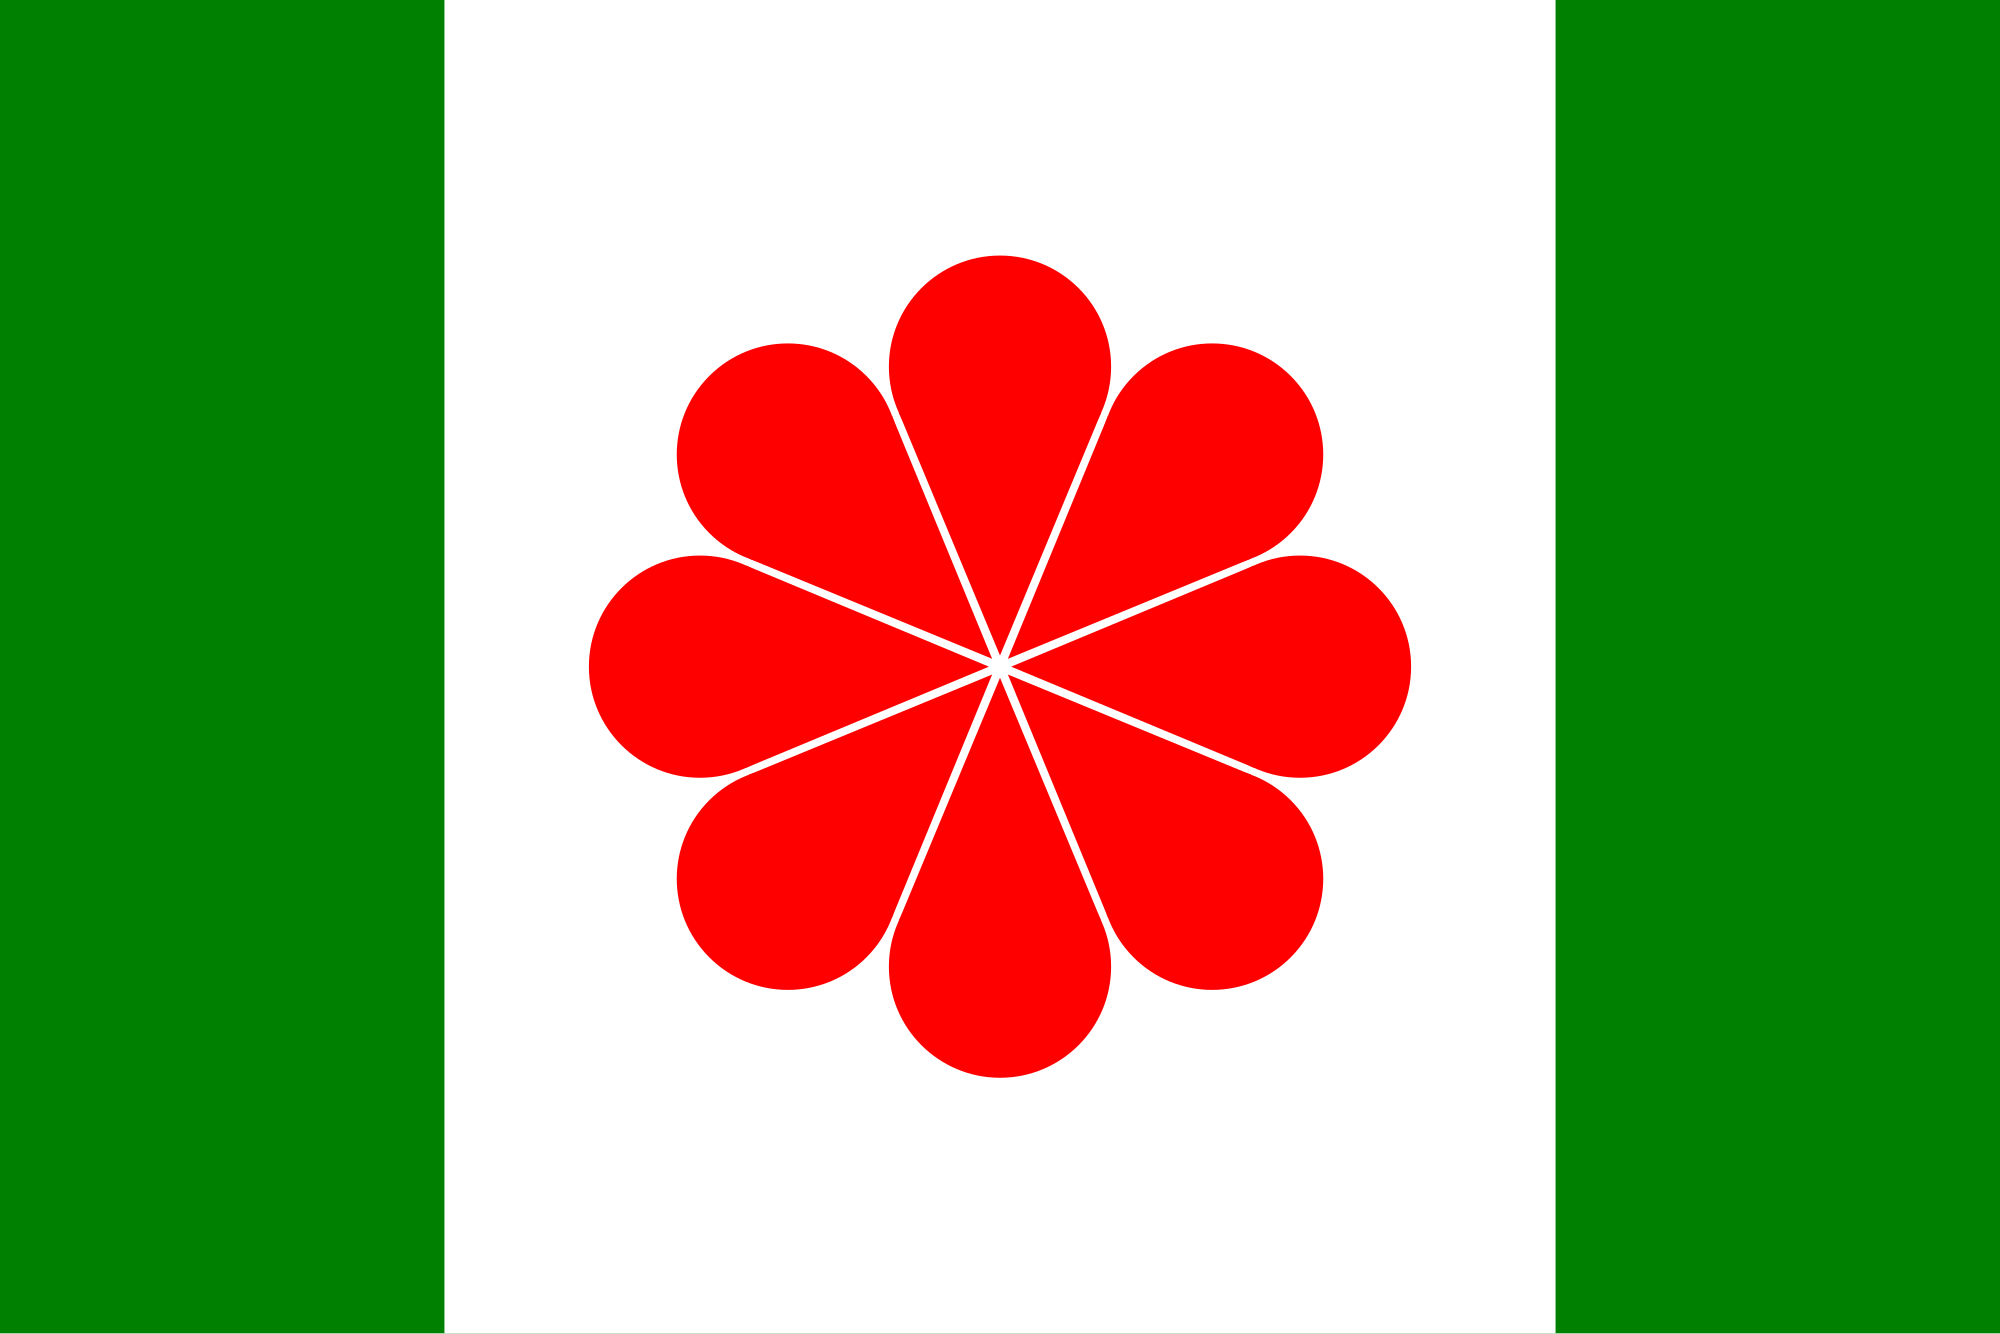 2000px-Flag_of_Taiwan_proposed_1996.svg.png